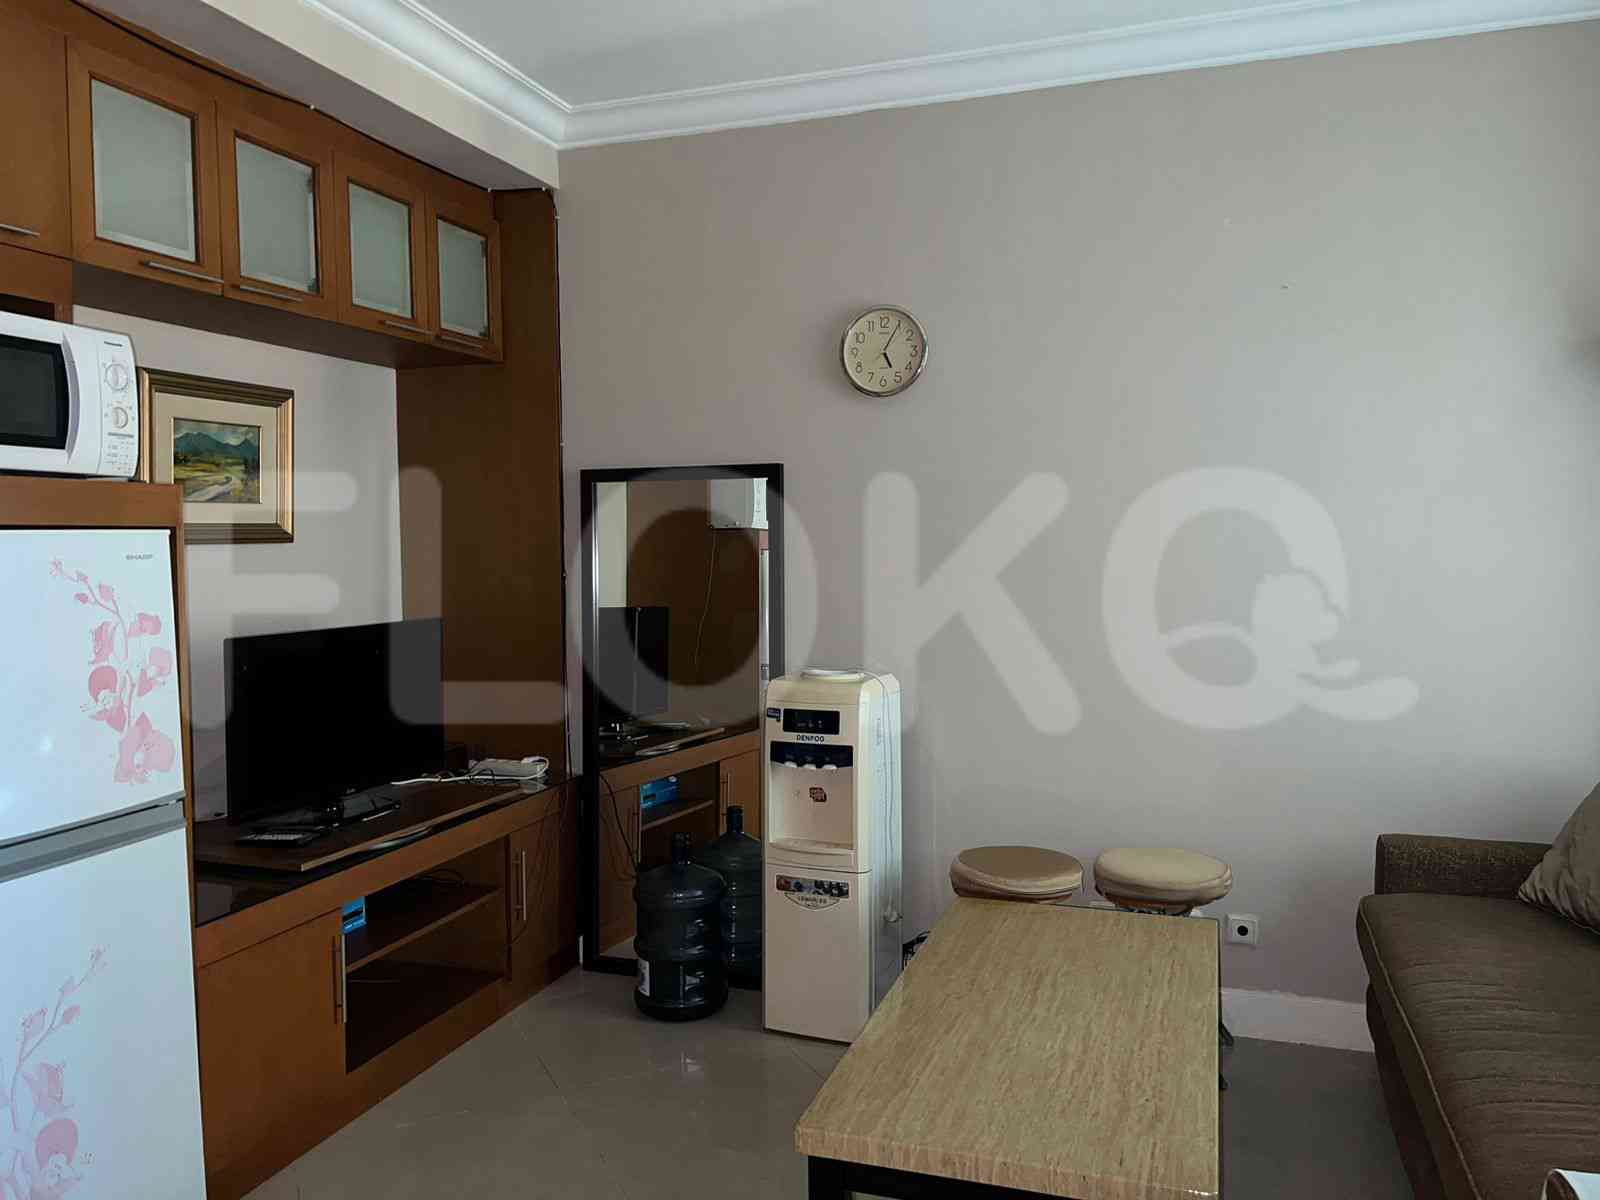 1 Bedroom on 9th Floor for Rent in Batavia Apartment - fbe7ee 1